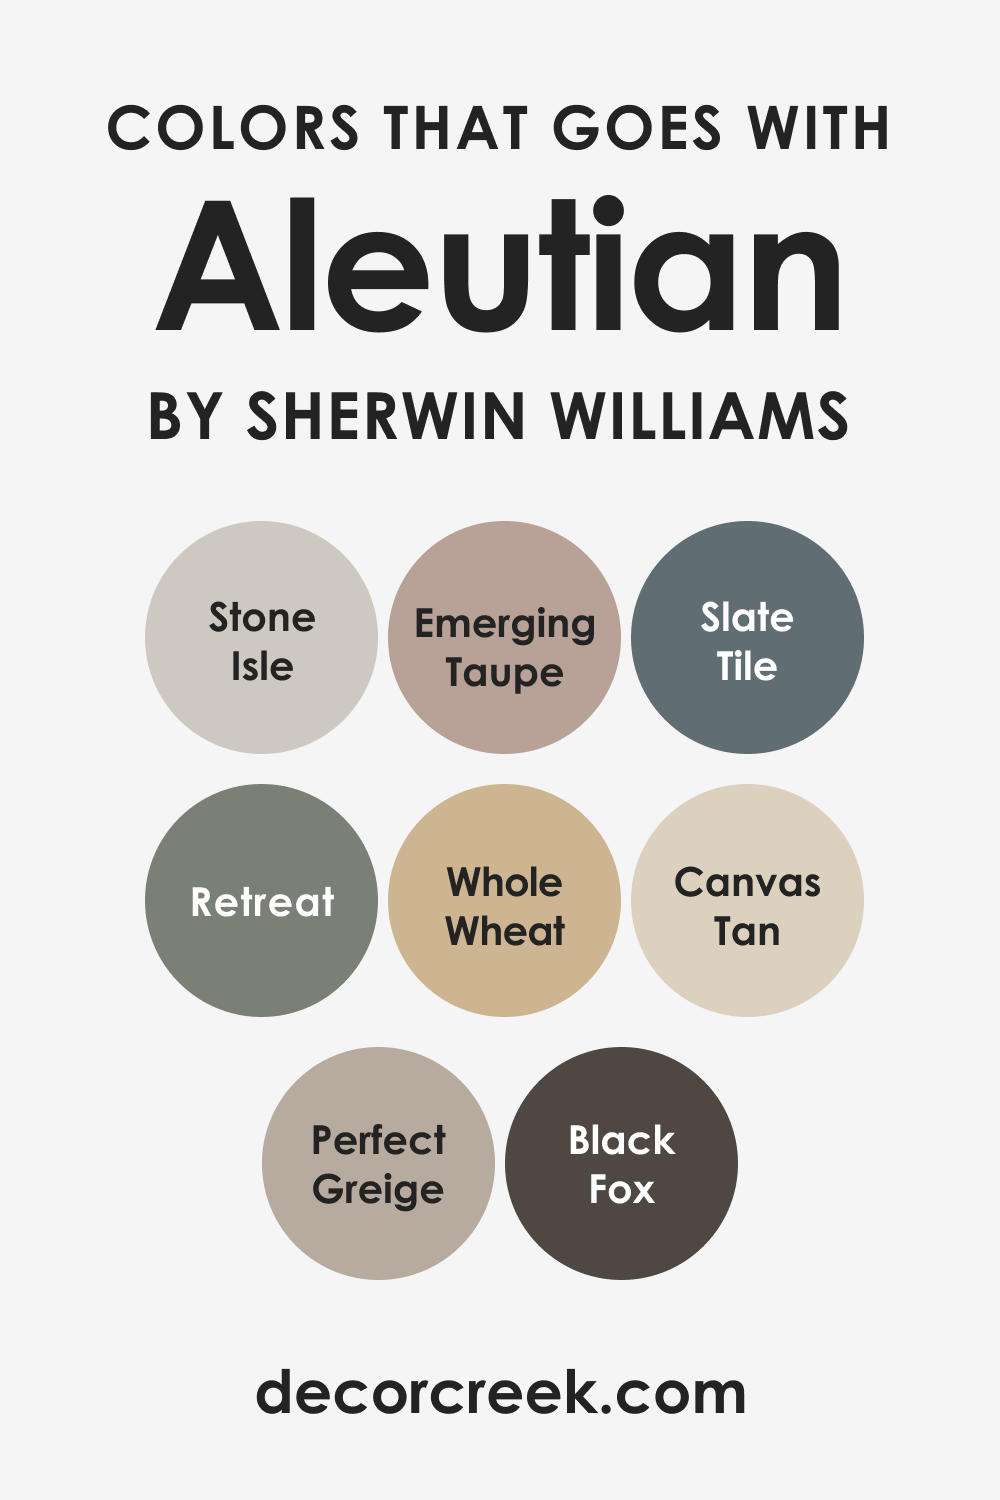 What Colors Go With Aleutian Color by Sherwin-Williams?